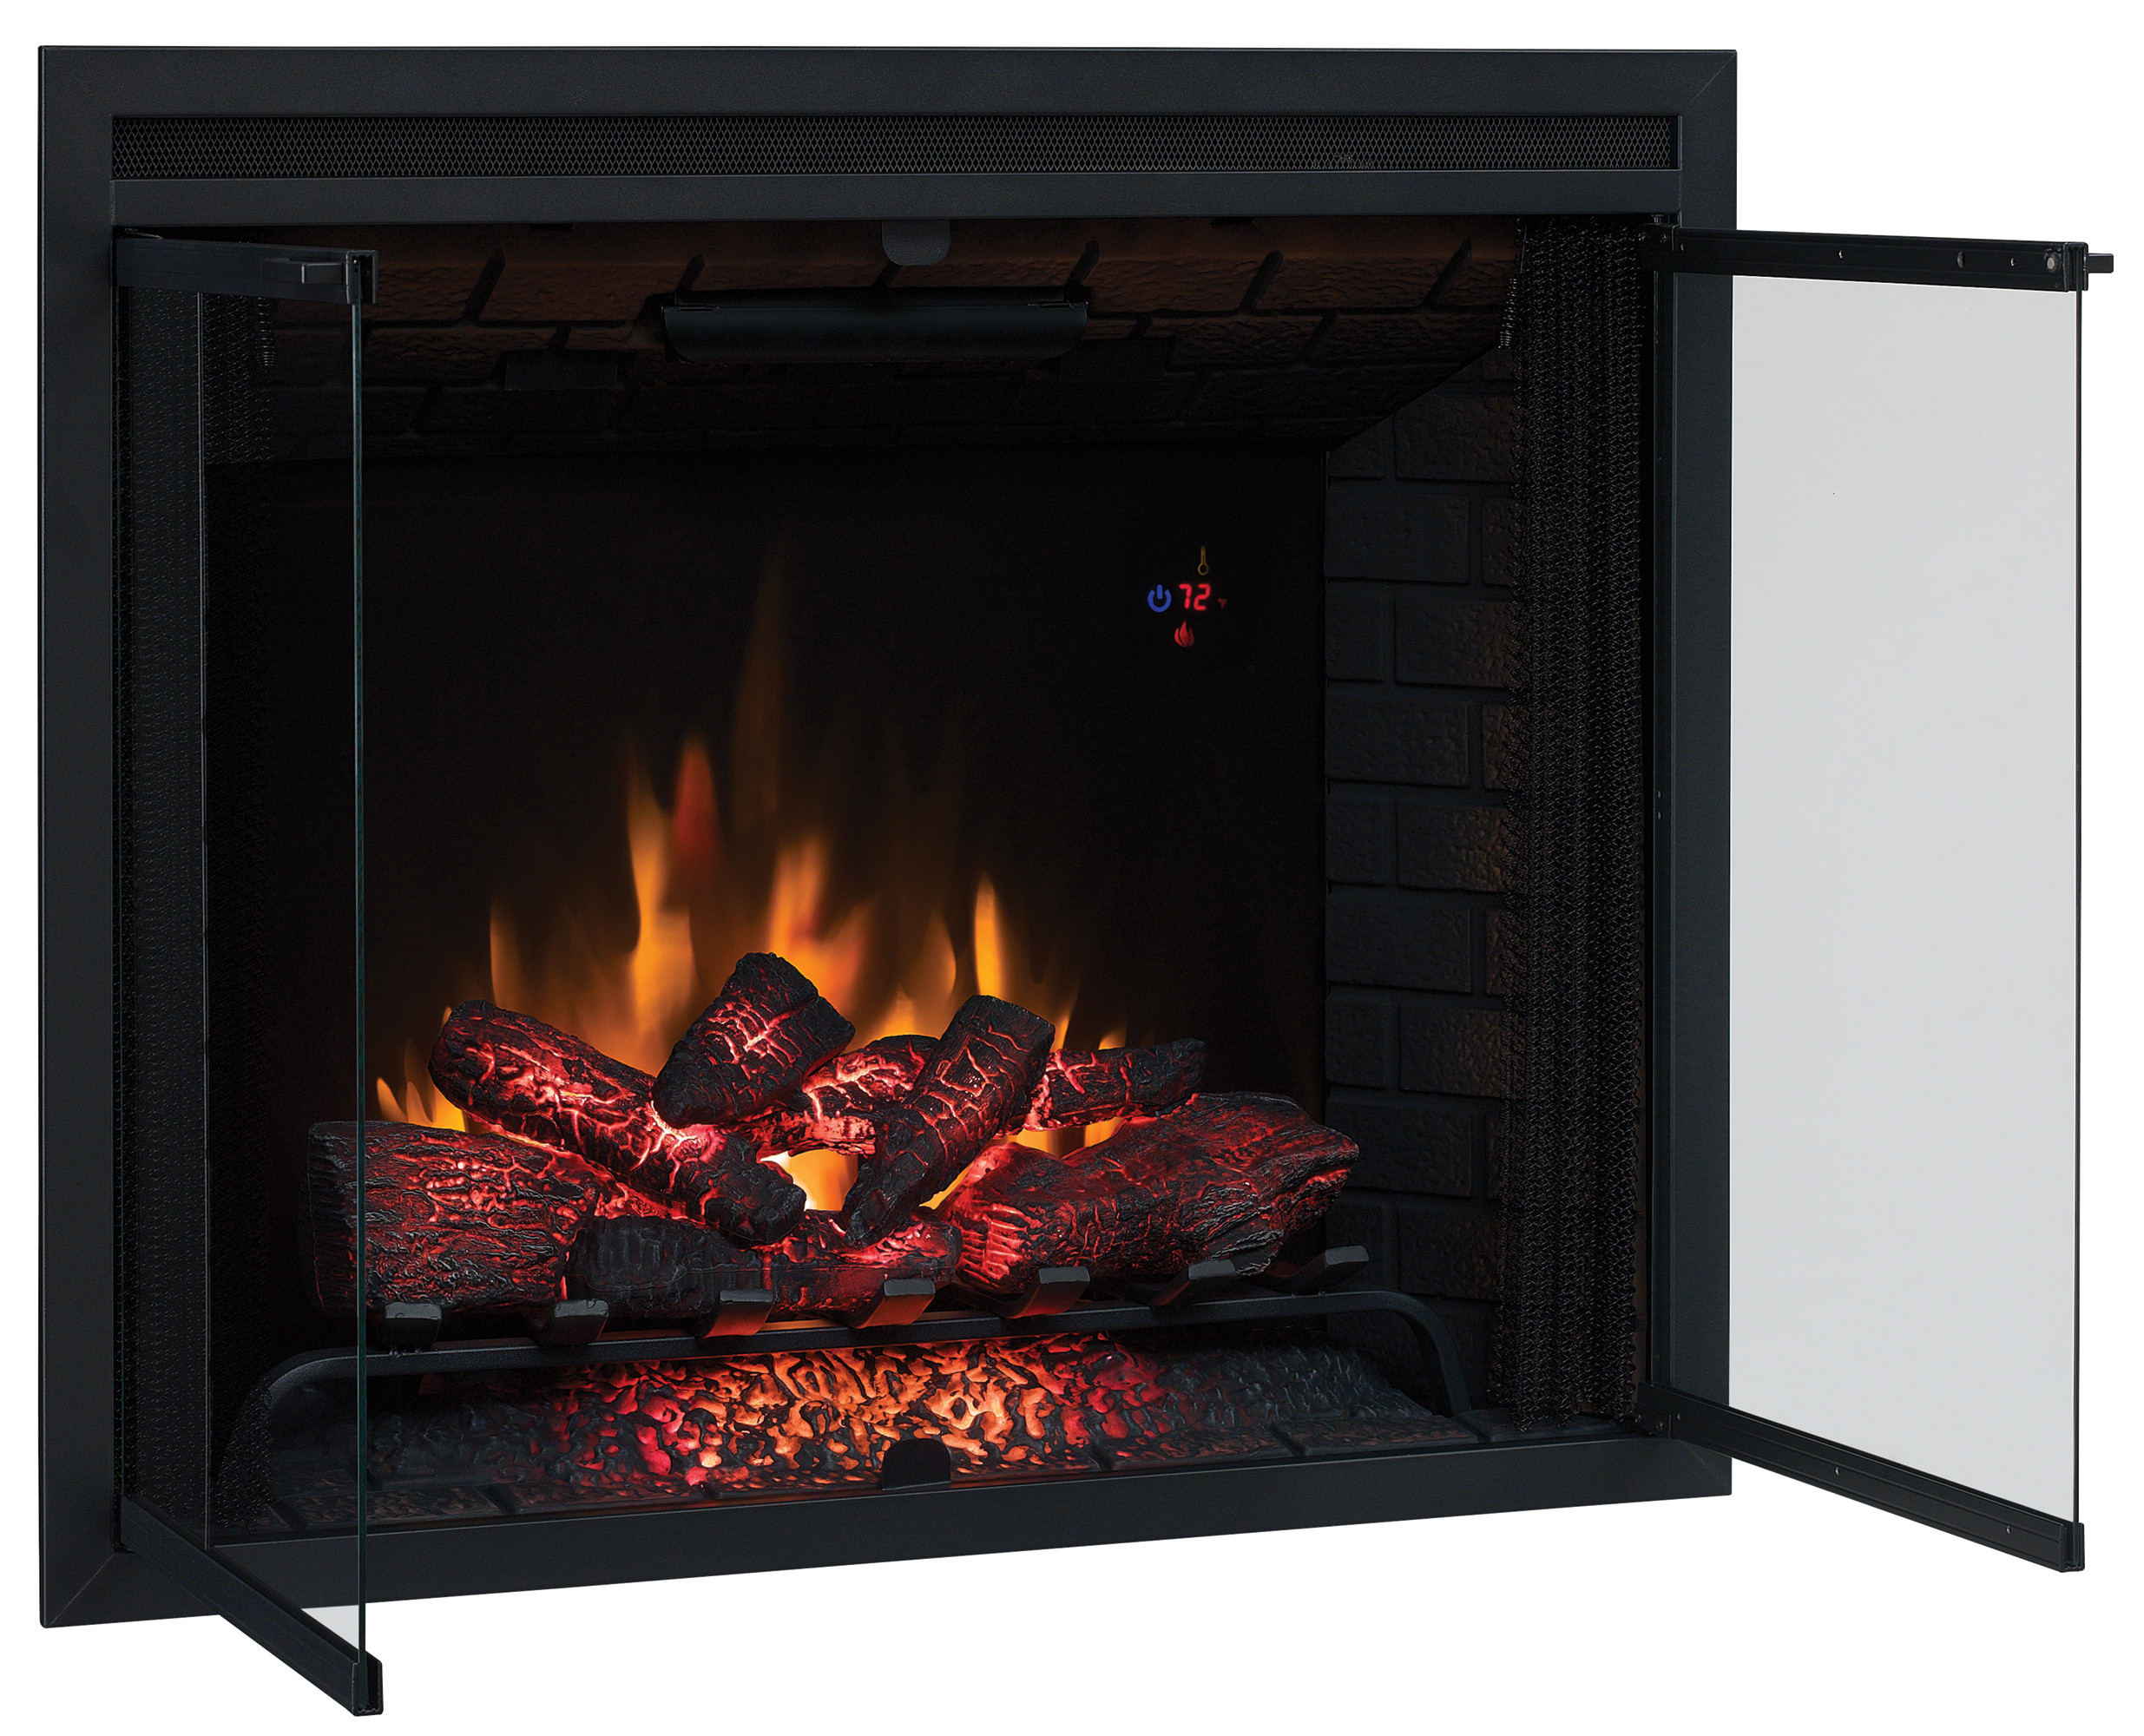 Walmart Electric Fireplace Insert
 39" Traditional Built in Electric Fireplace Insert with